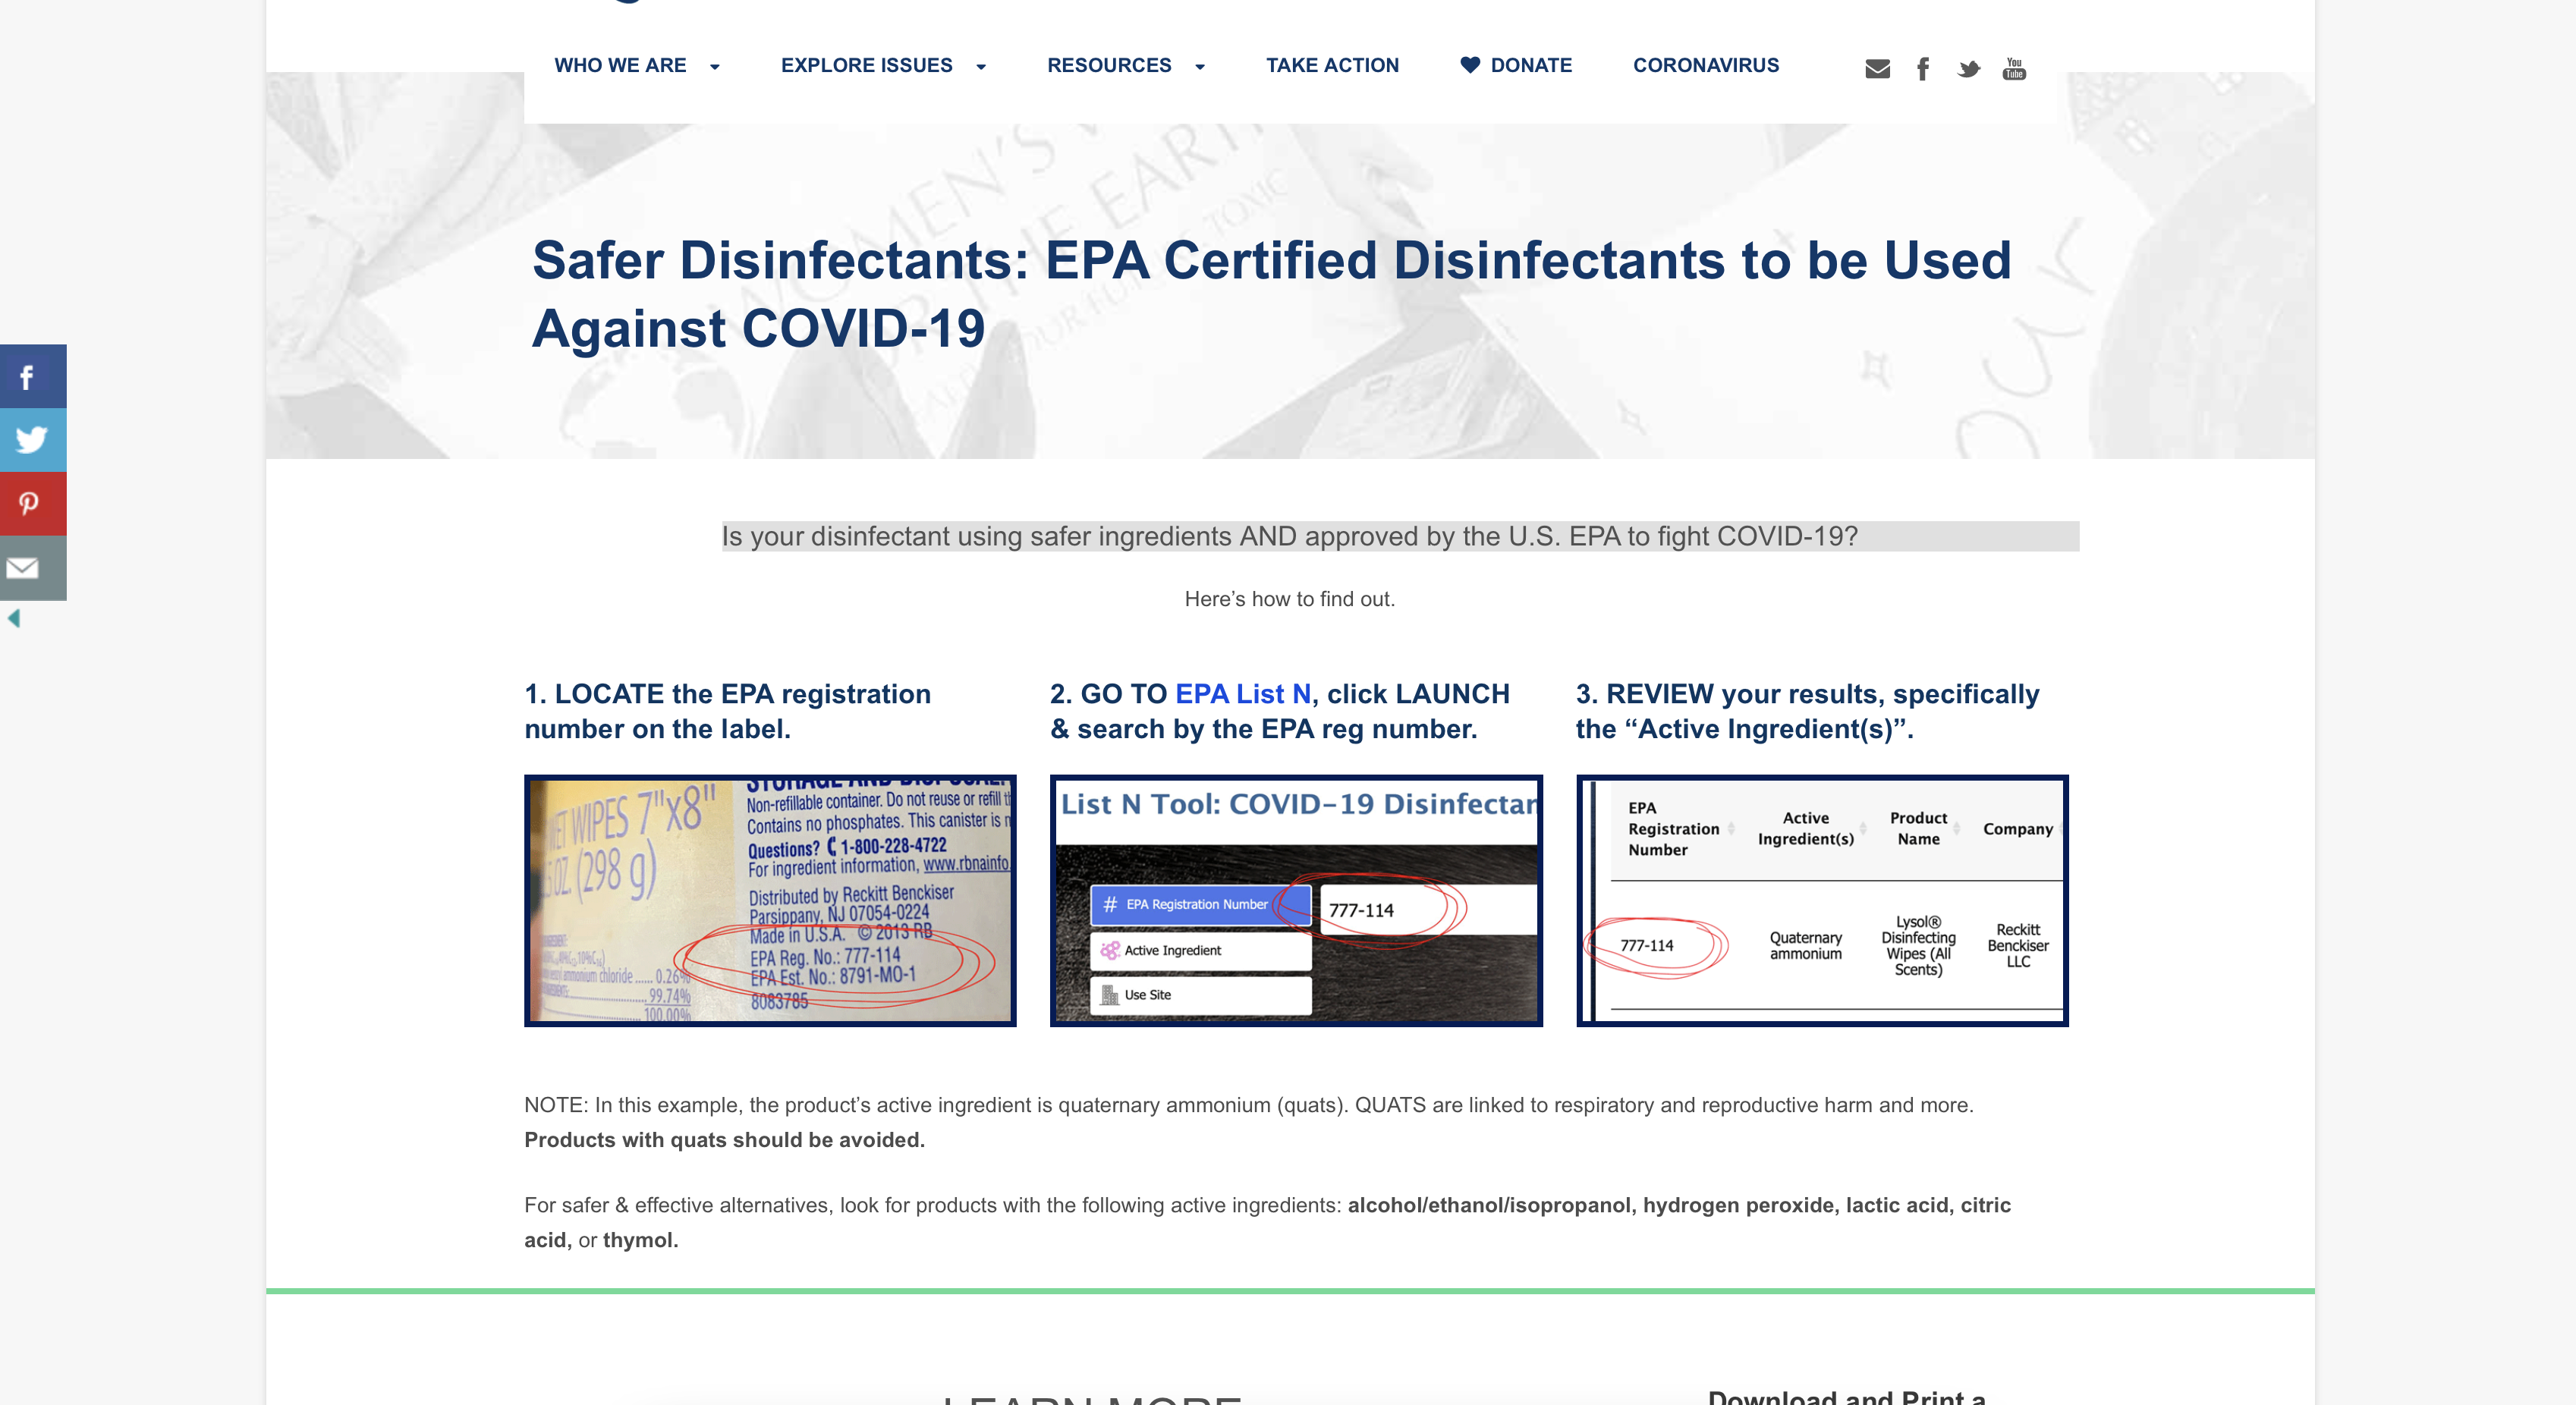 Is your disinfectant using safer ingredients AND approved by the U.S. EPA to fight COVID-19?